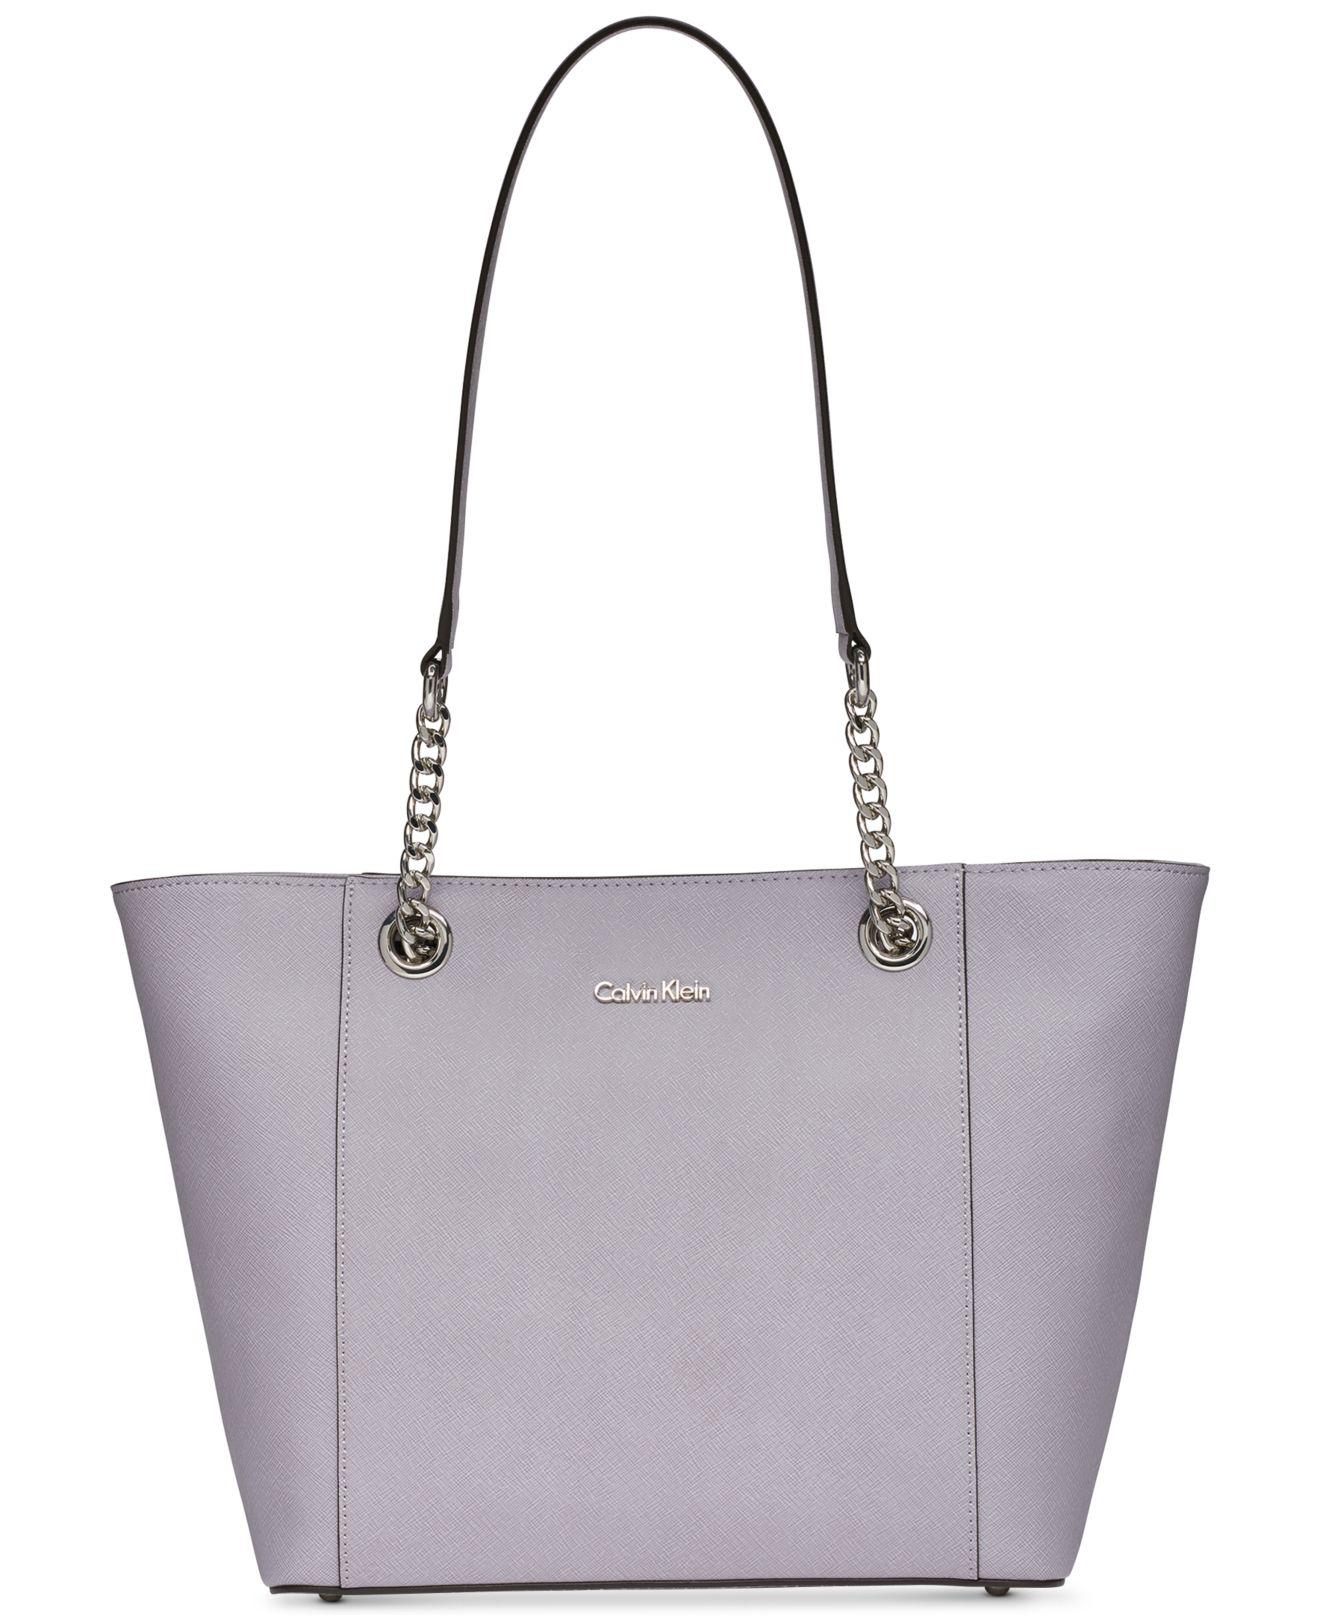 Calvin Klein Leather Hayden Large Tote in Dusty Lilac/Silver (Purple) - Lyst